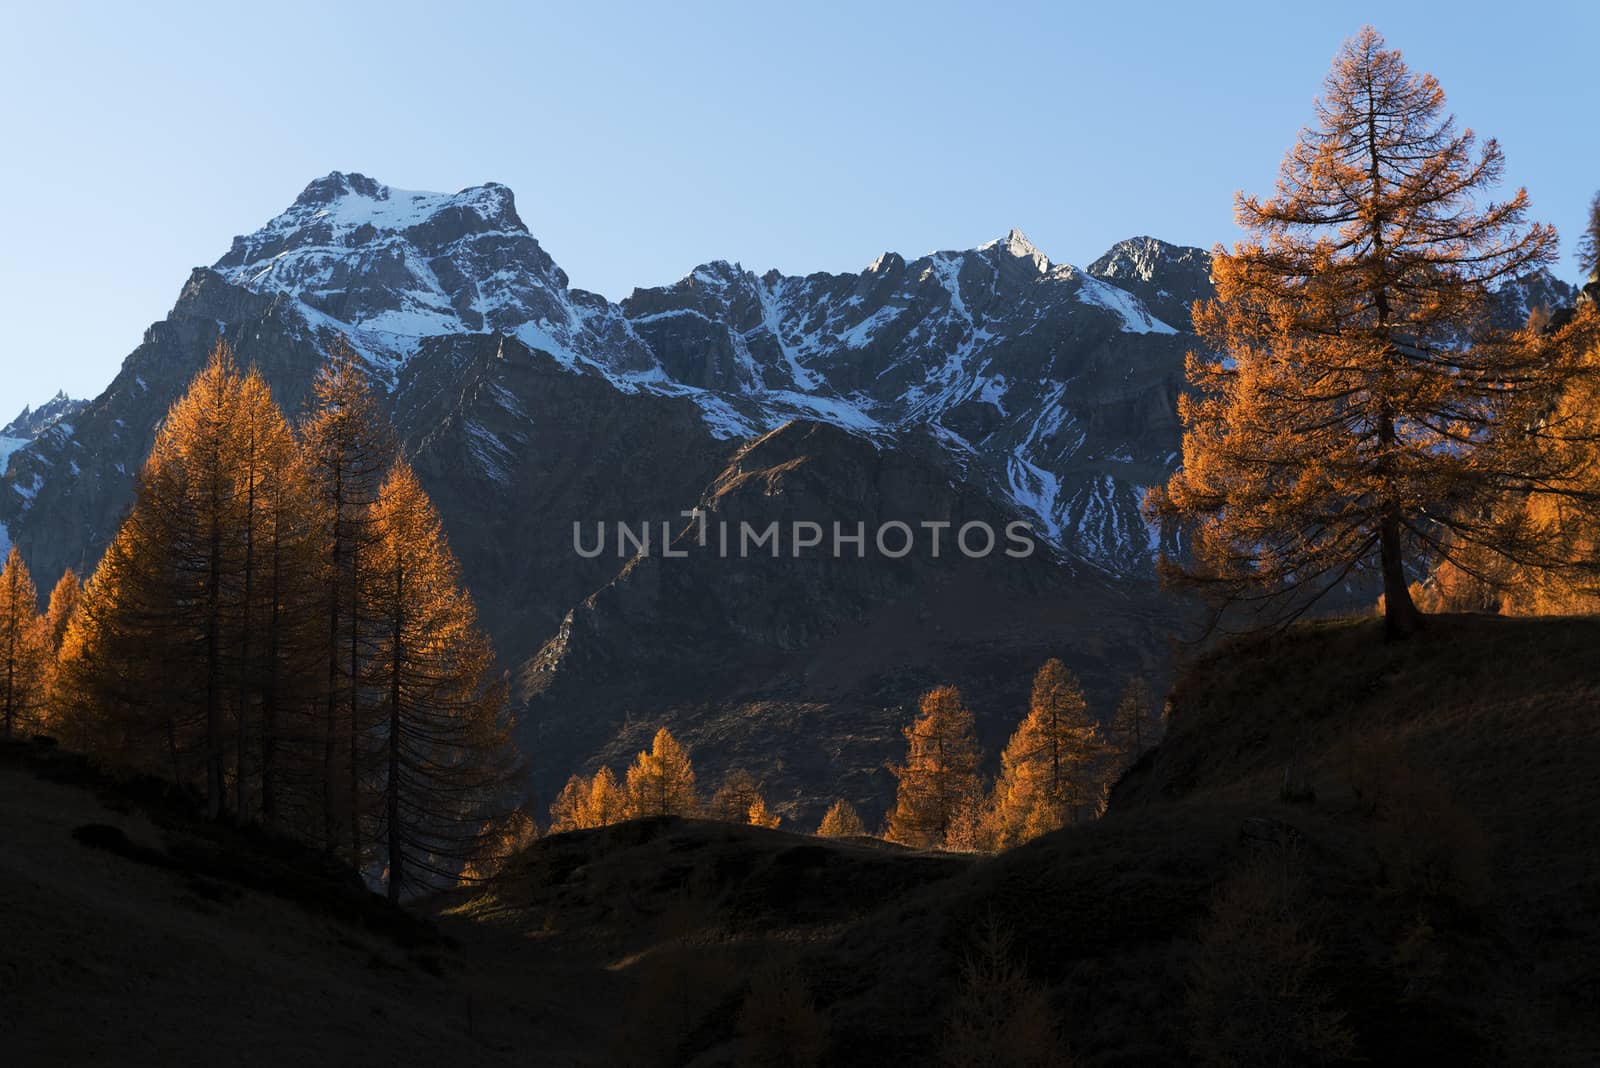 Autumn colors at the Devero Alp by Mdc1970